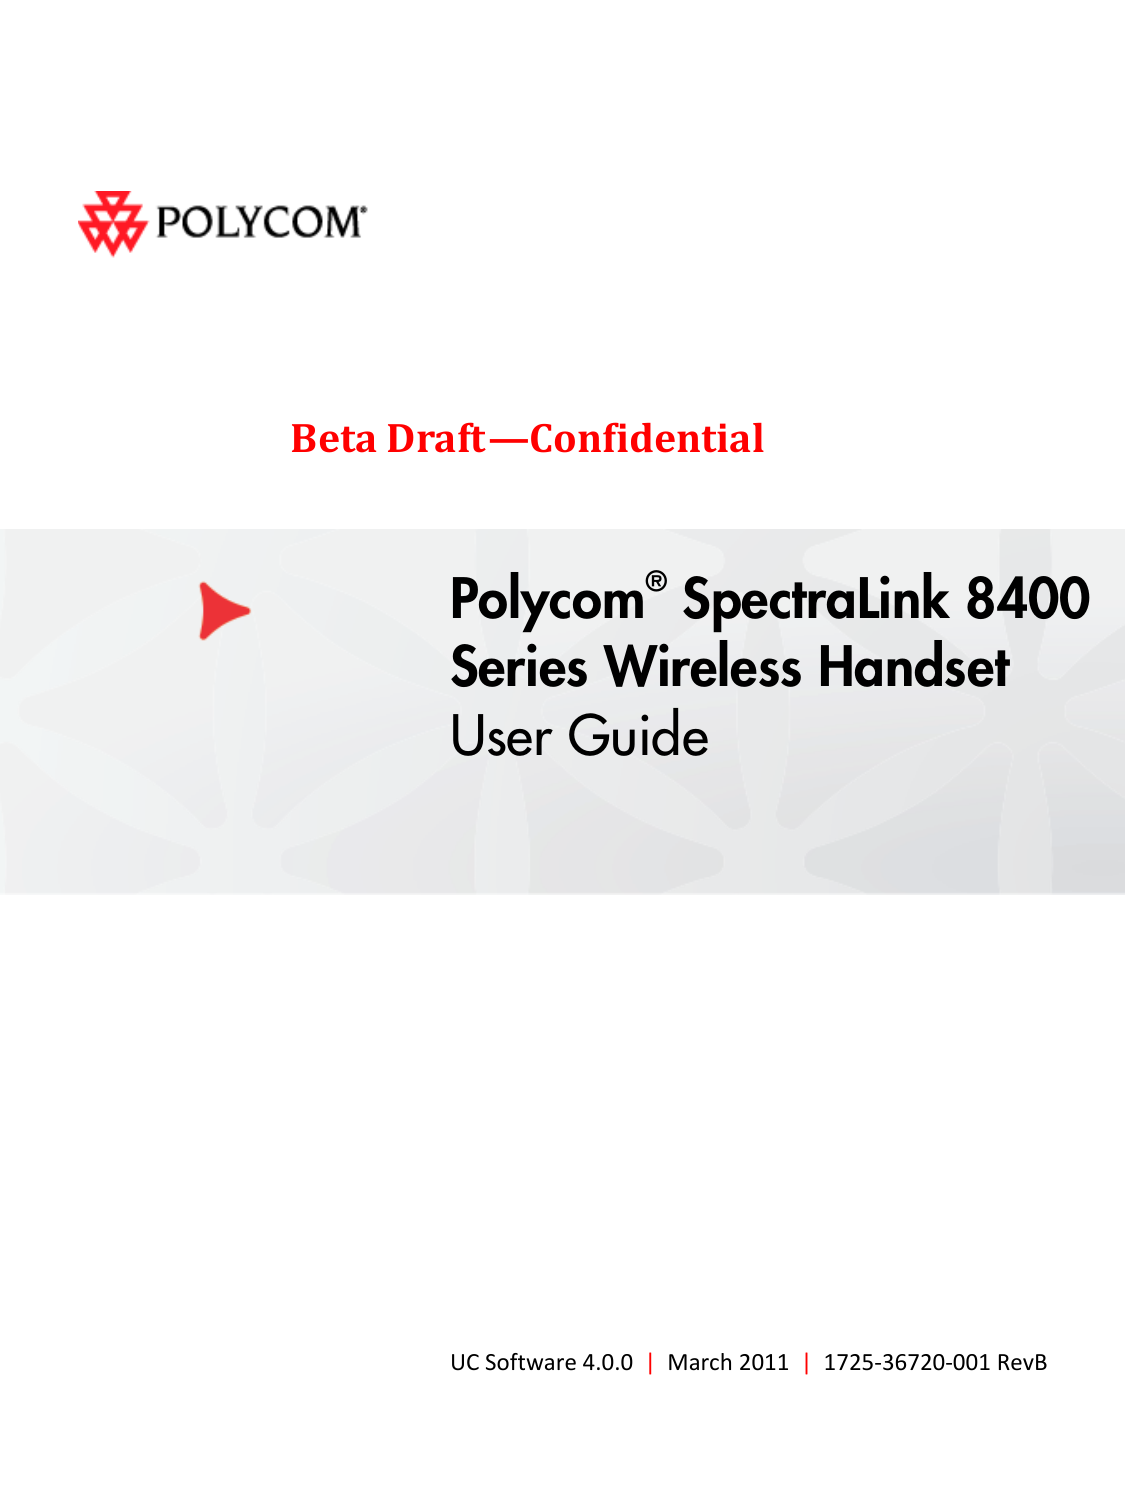      Beta Draft—Confidential    Polycom® SpectraLink 8400 Series Wireless Handset User Guide              UC Software 4.0.0  |  March 2011  |  1725-36720-001 RevB  